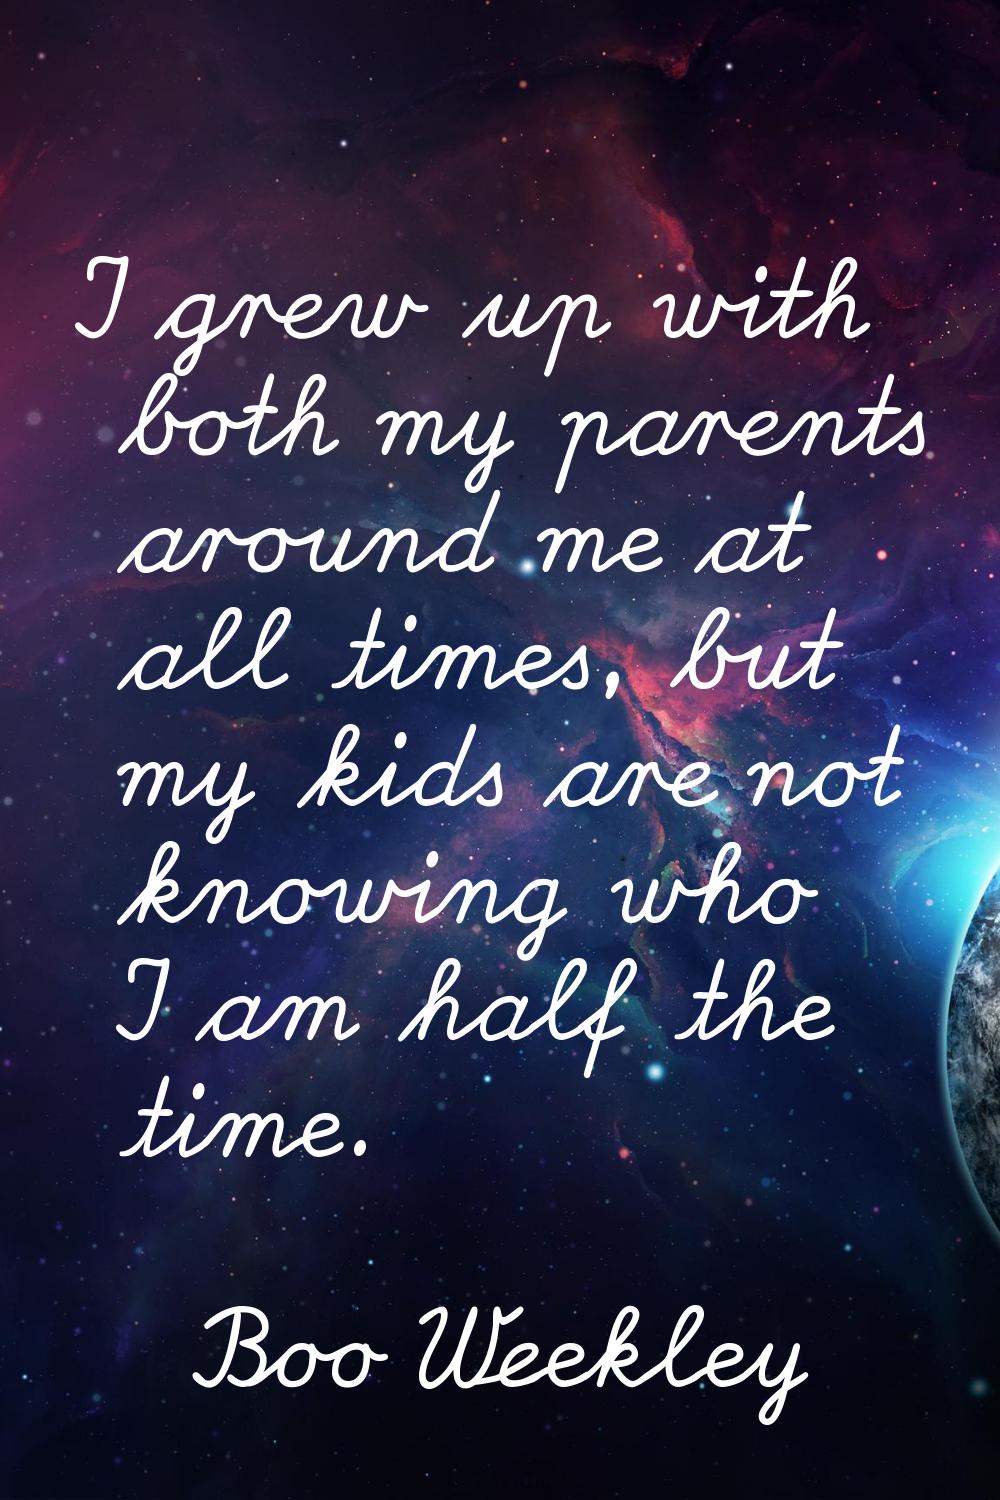 I grew up with both my parents around me at all times, but my kids are not knowing who I am half th